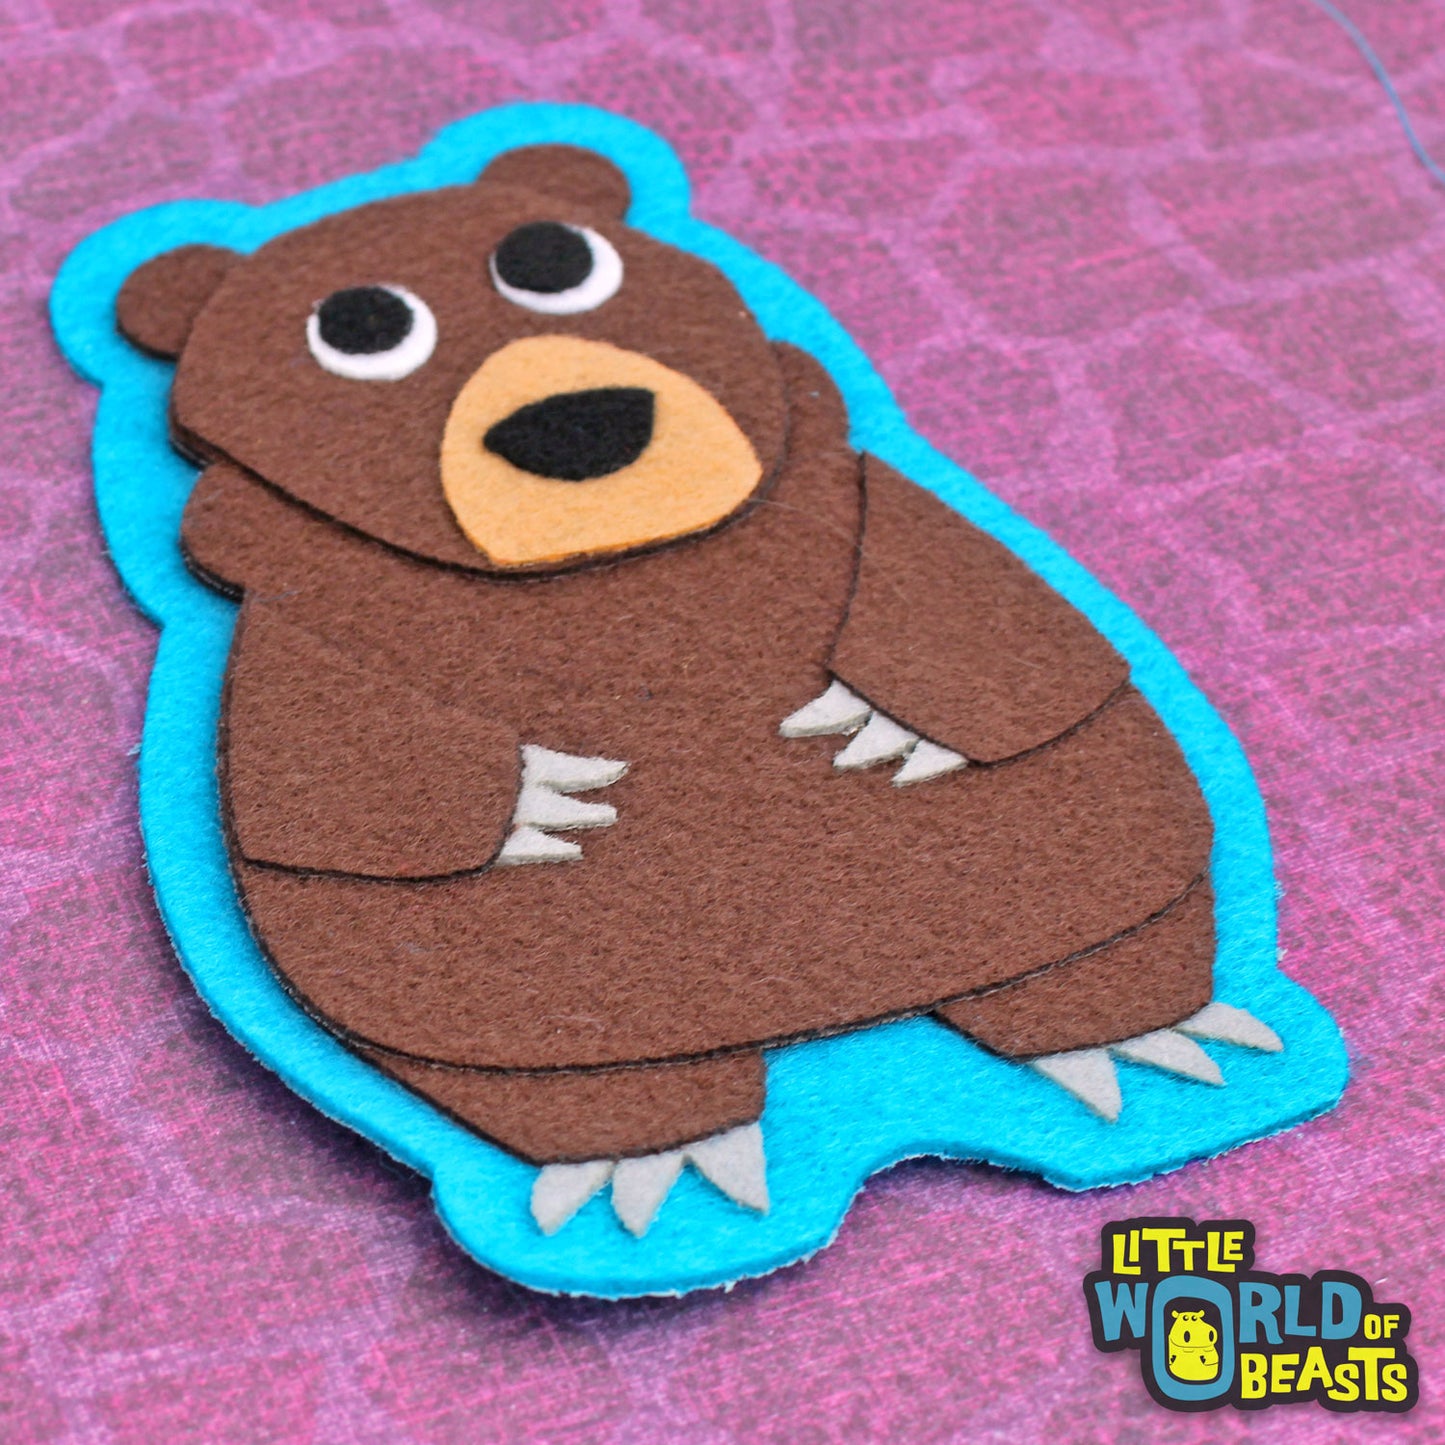 Felt Applique Grizzly Bear - Sew on or Iron on Patch - Little World of Beasts